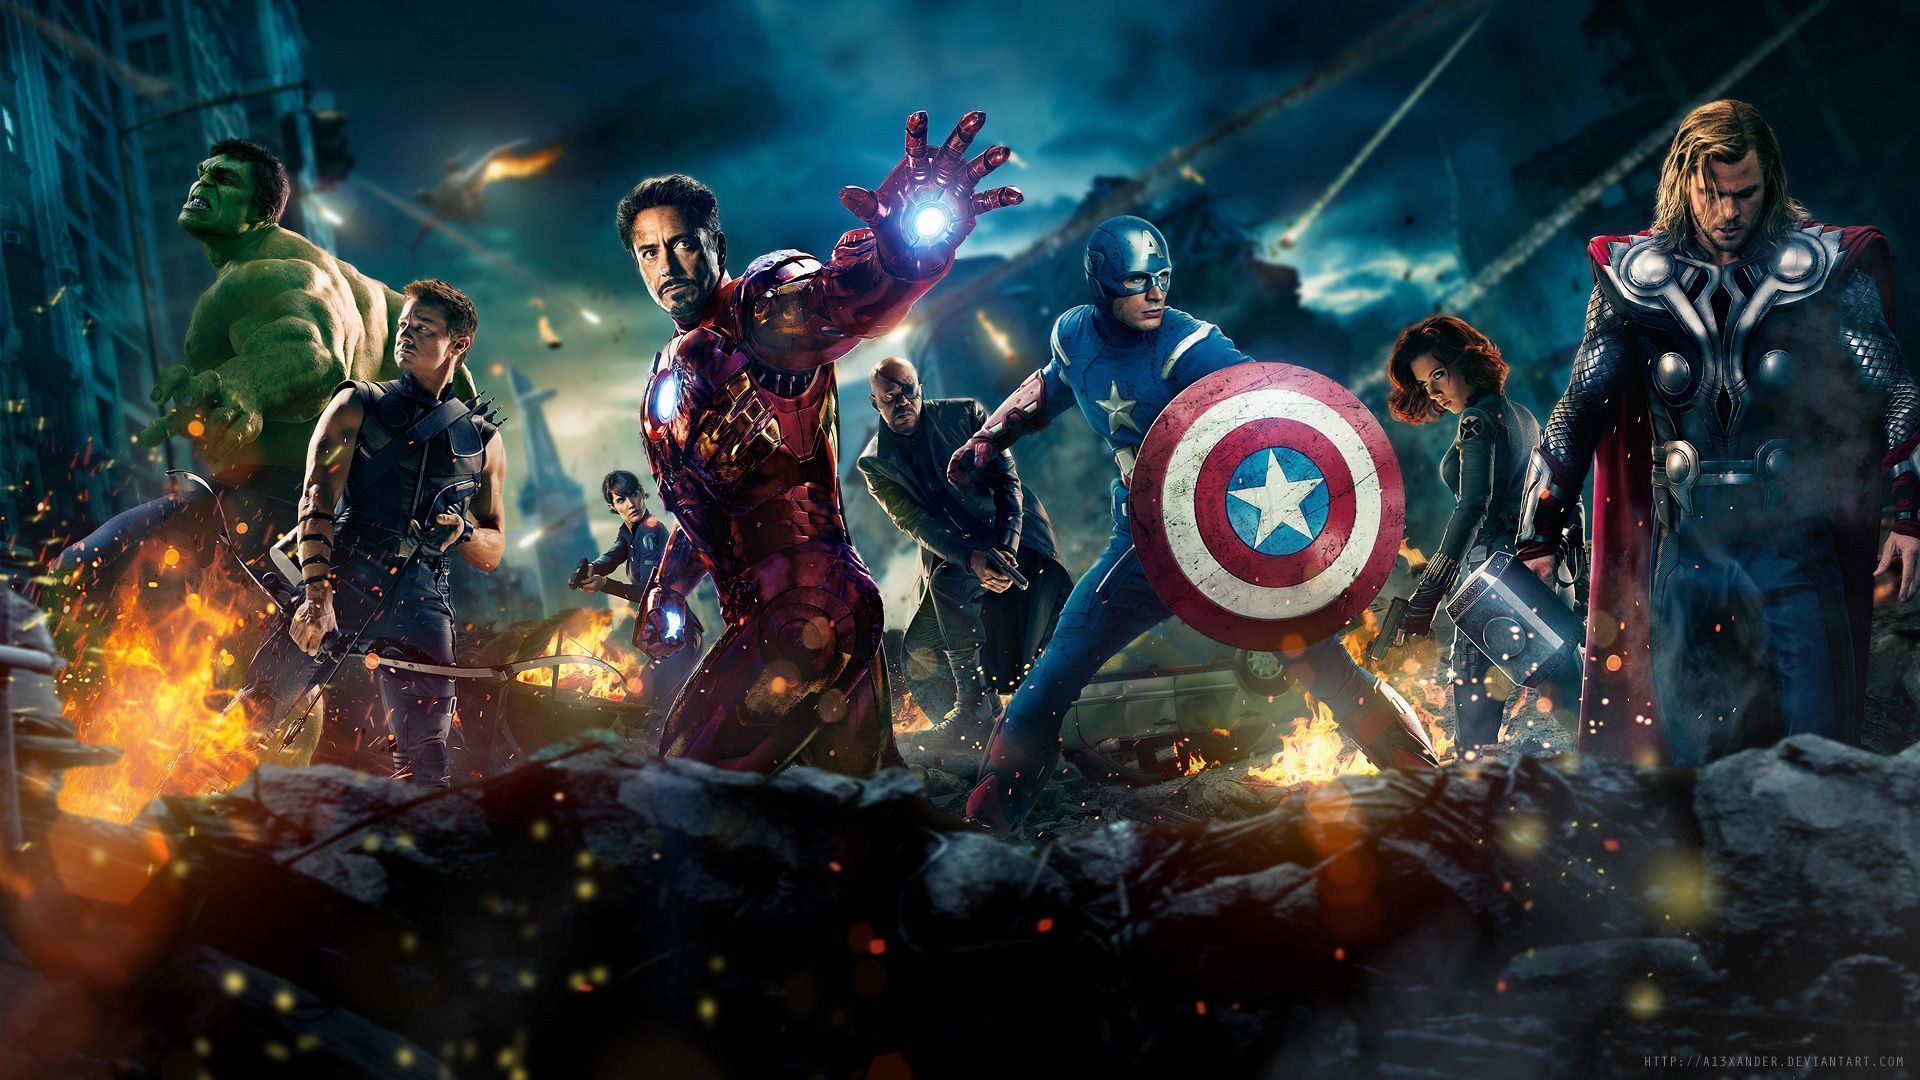 Download Iron Man Avengers The Movie Full Wallpaper 1920x1080